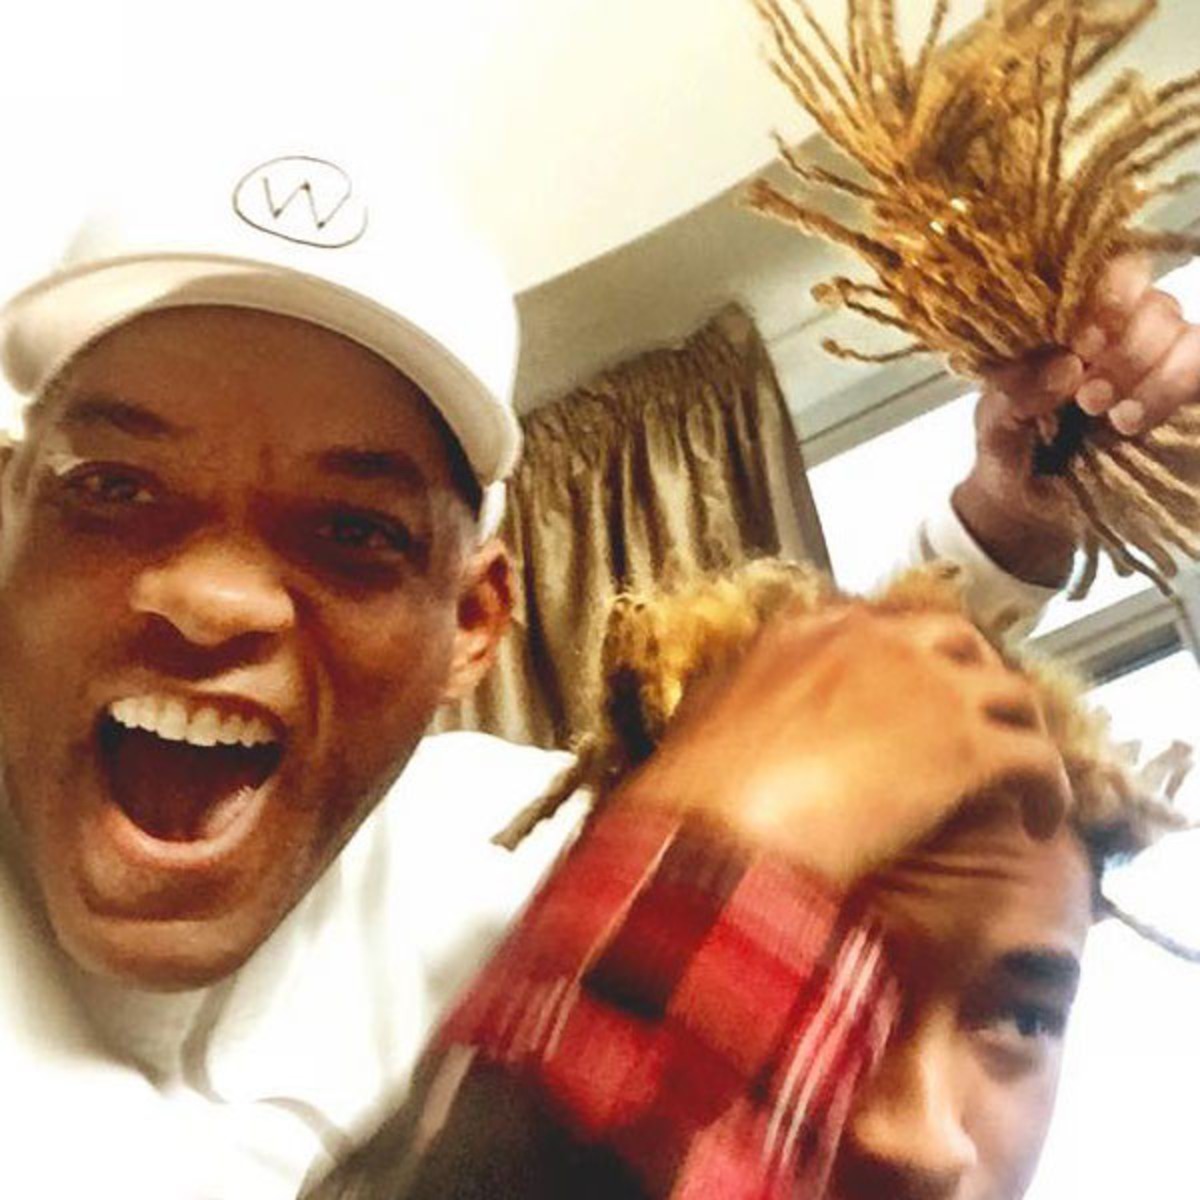 Will Smith Chops Off Jaden Smith's Hair and Tries It On - E! Online